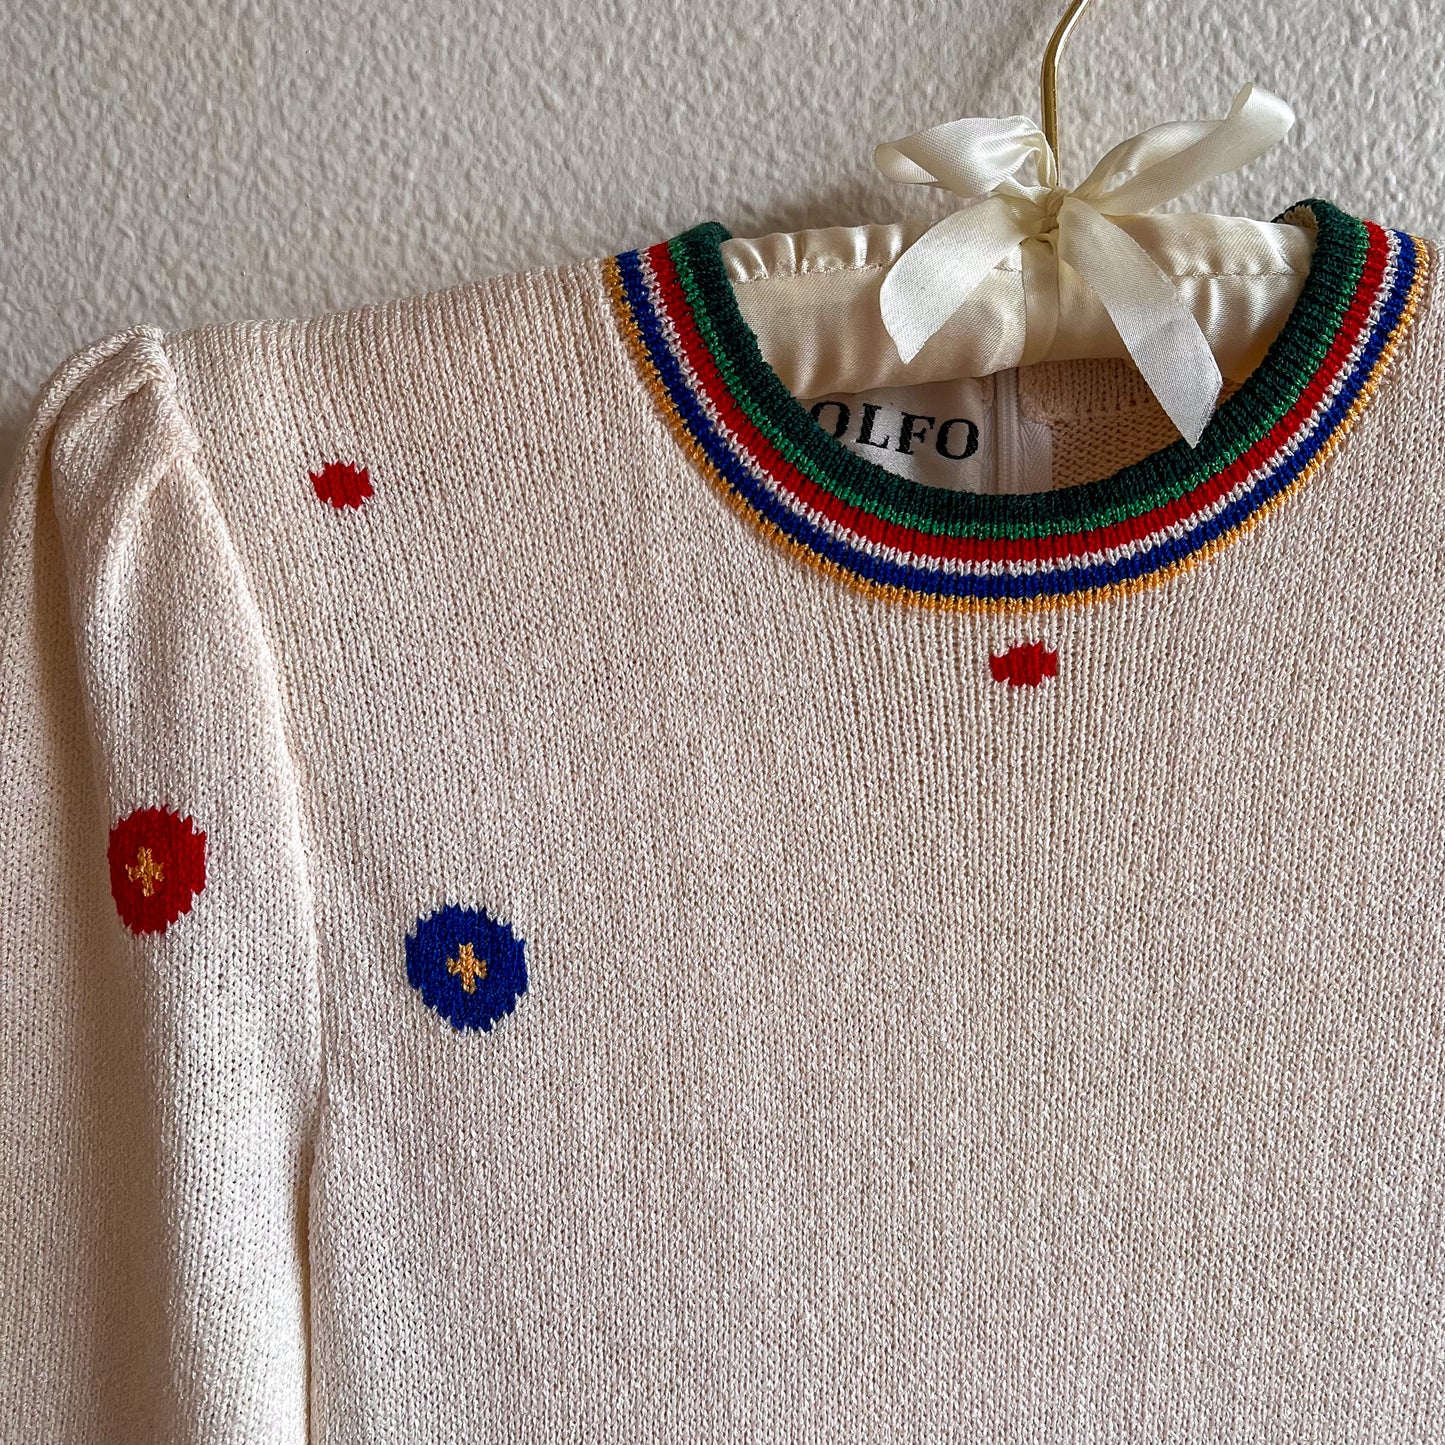 1980s Ivory Sweater Dress With Red and Blue Appliqué (XS/S)